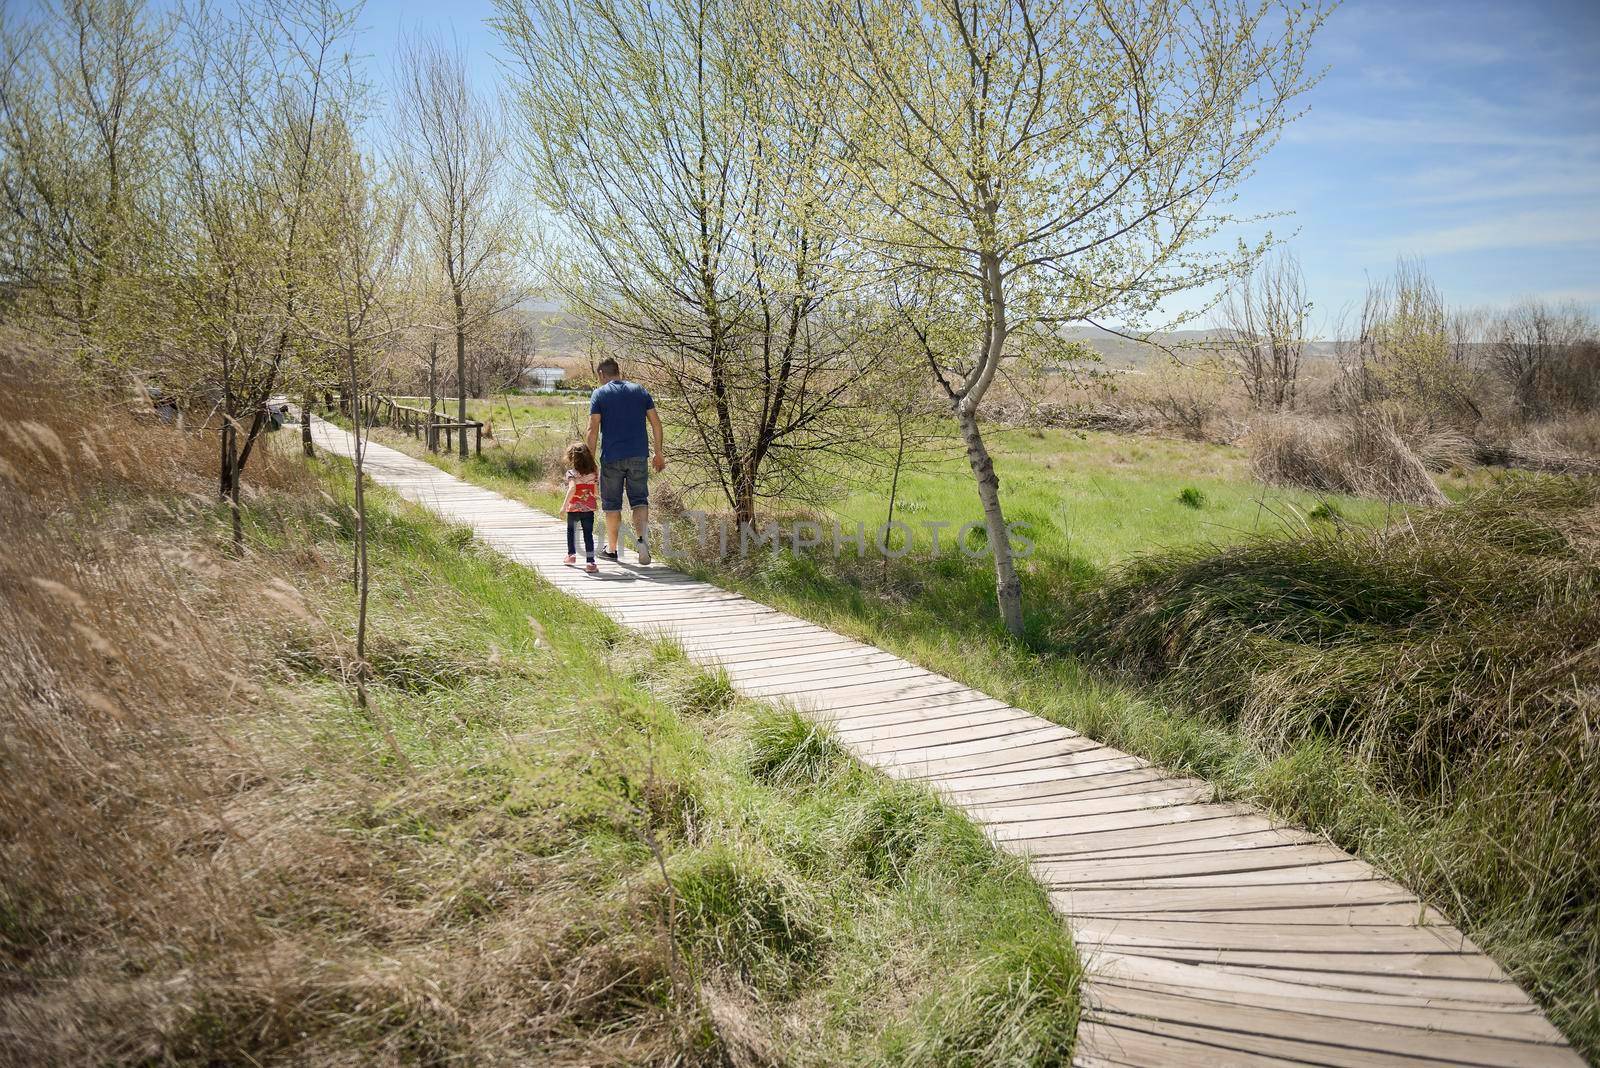 Father and little daughter walking on a path of wooden boards in a wetland in Padul, Granada, Andalusia, Spain